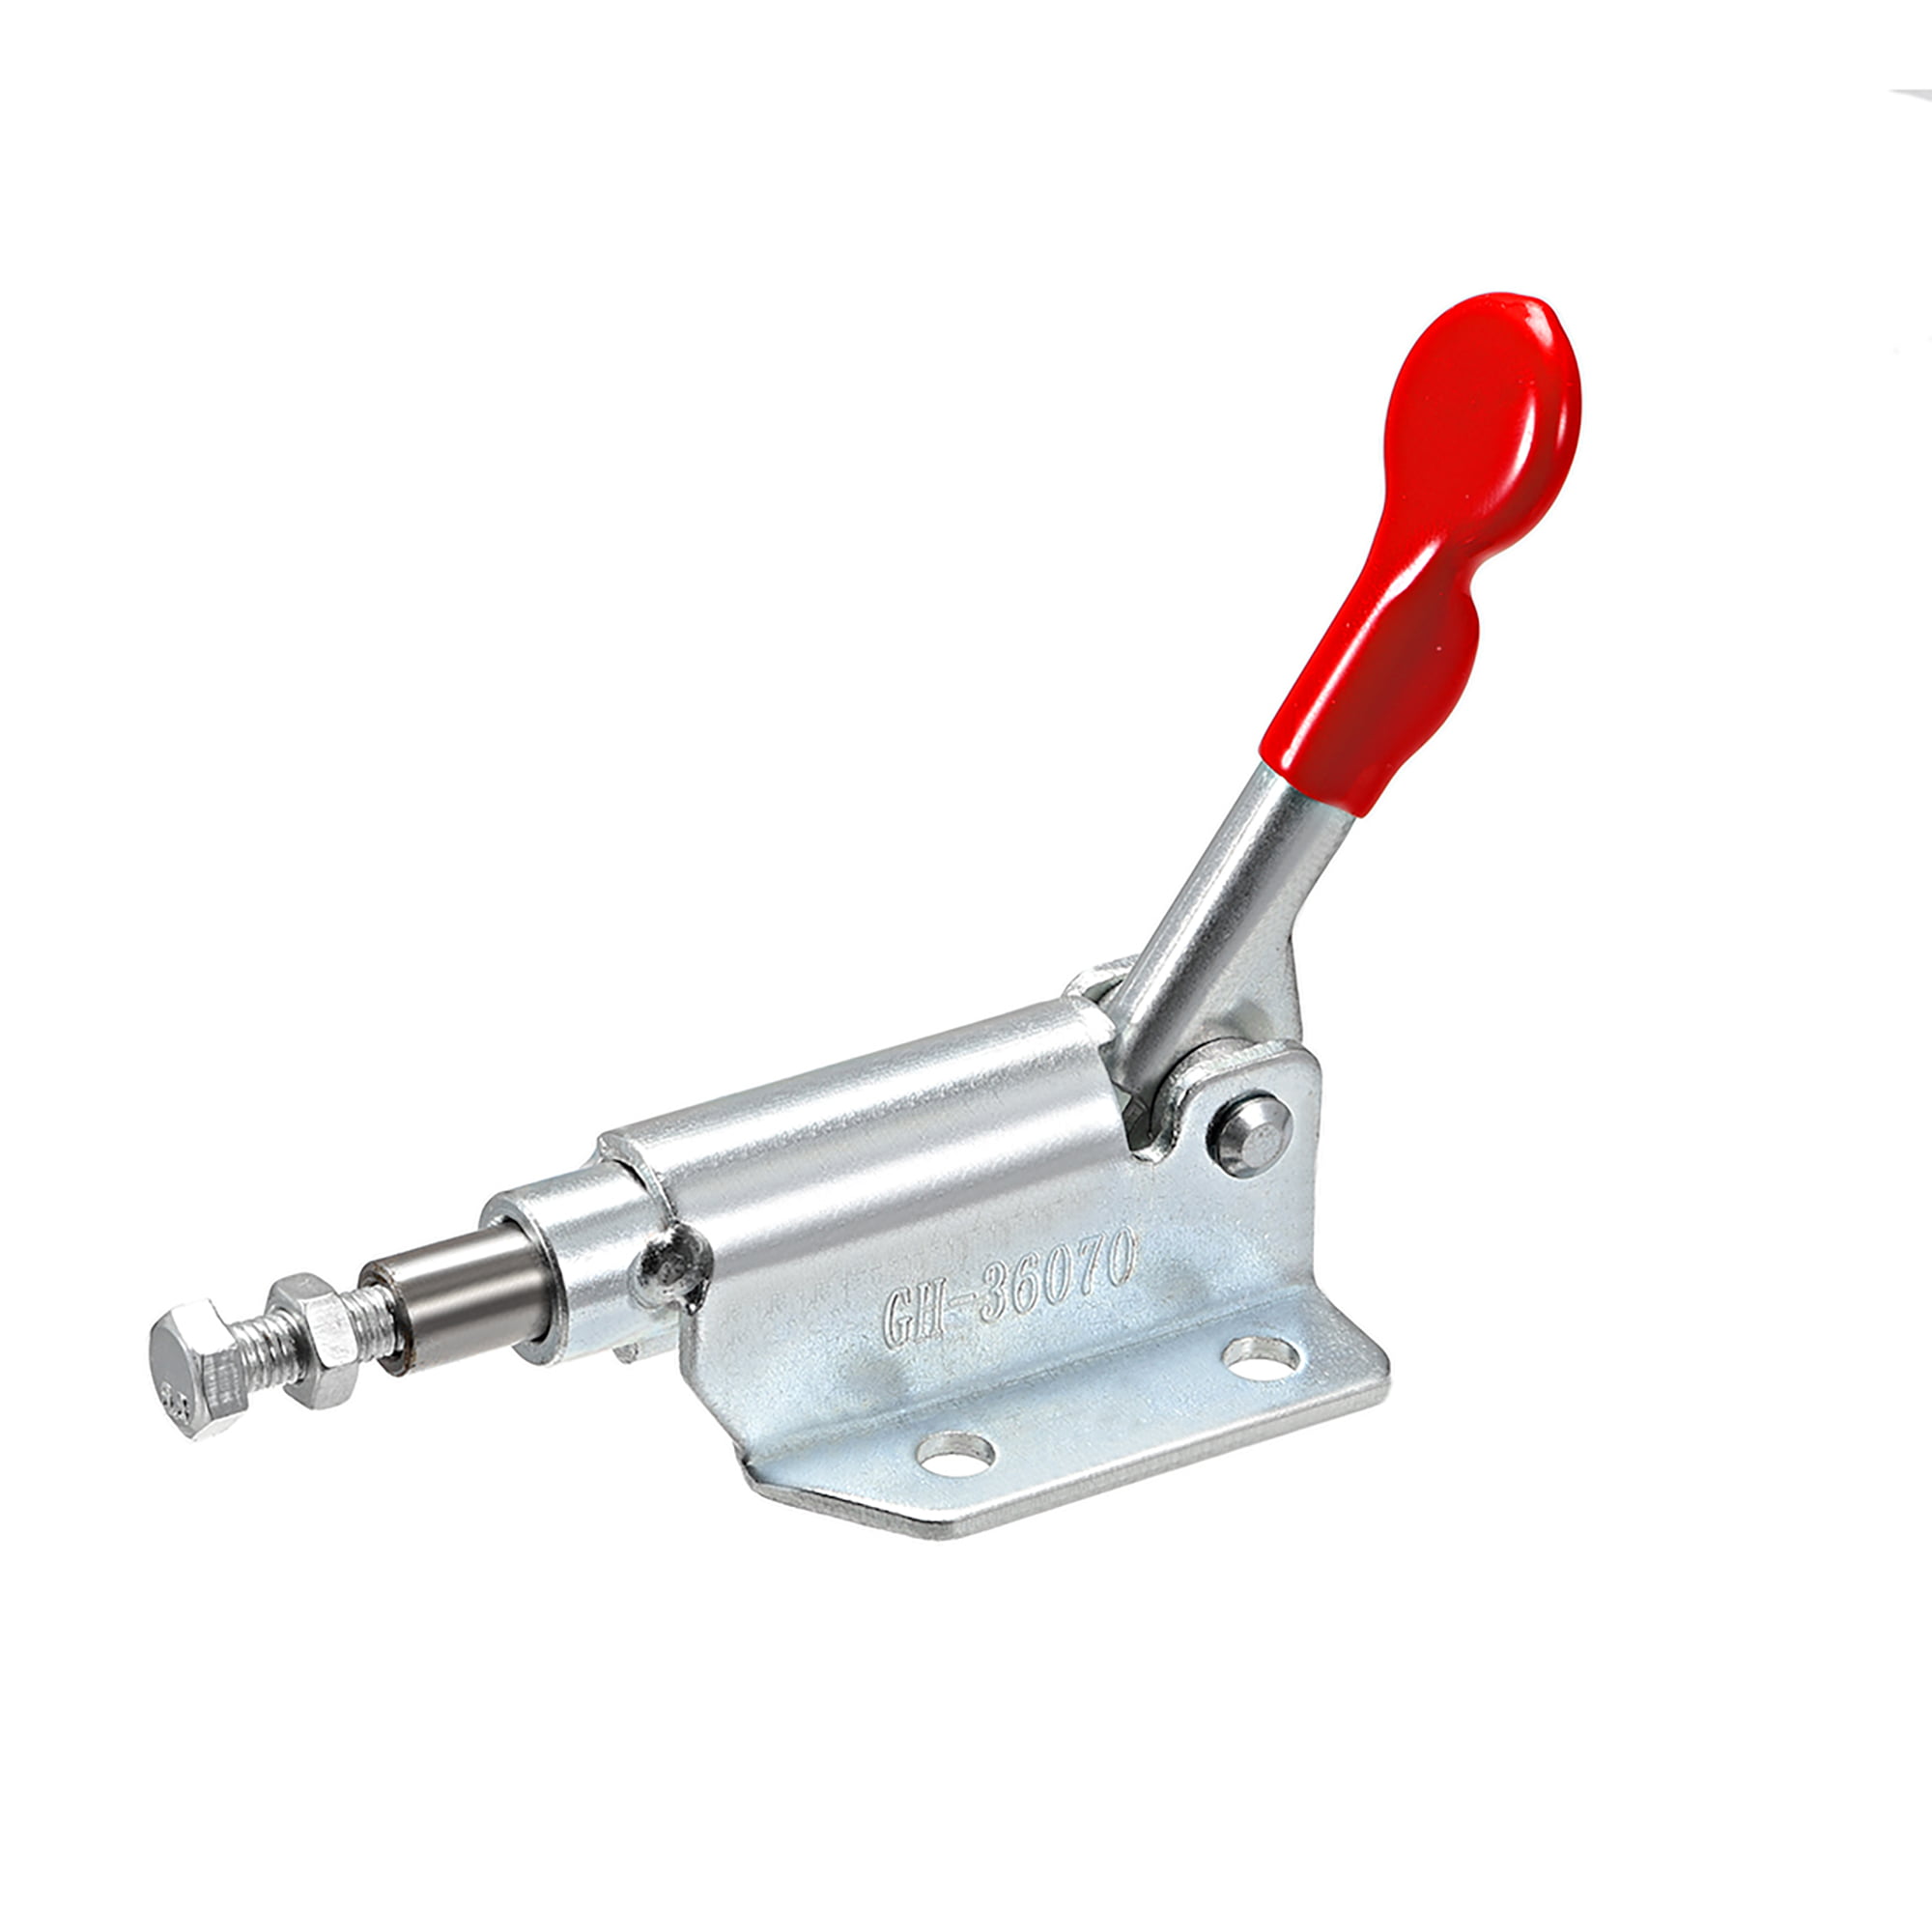 Details about   Pull Push Action Toggle Clamp 130 lbs/60kg Holding Capacity 10mm Stroke 